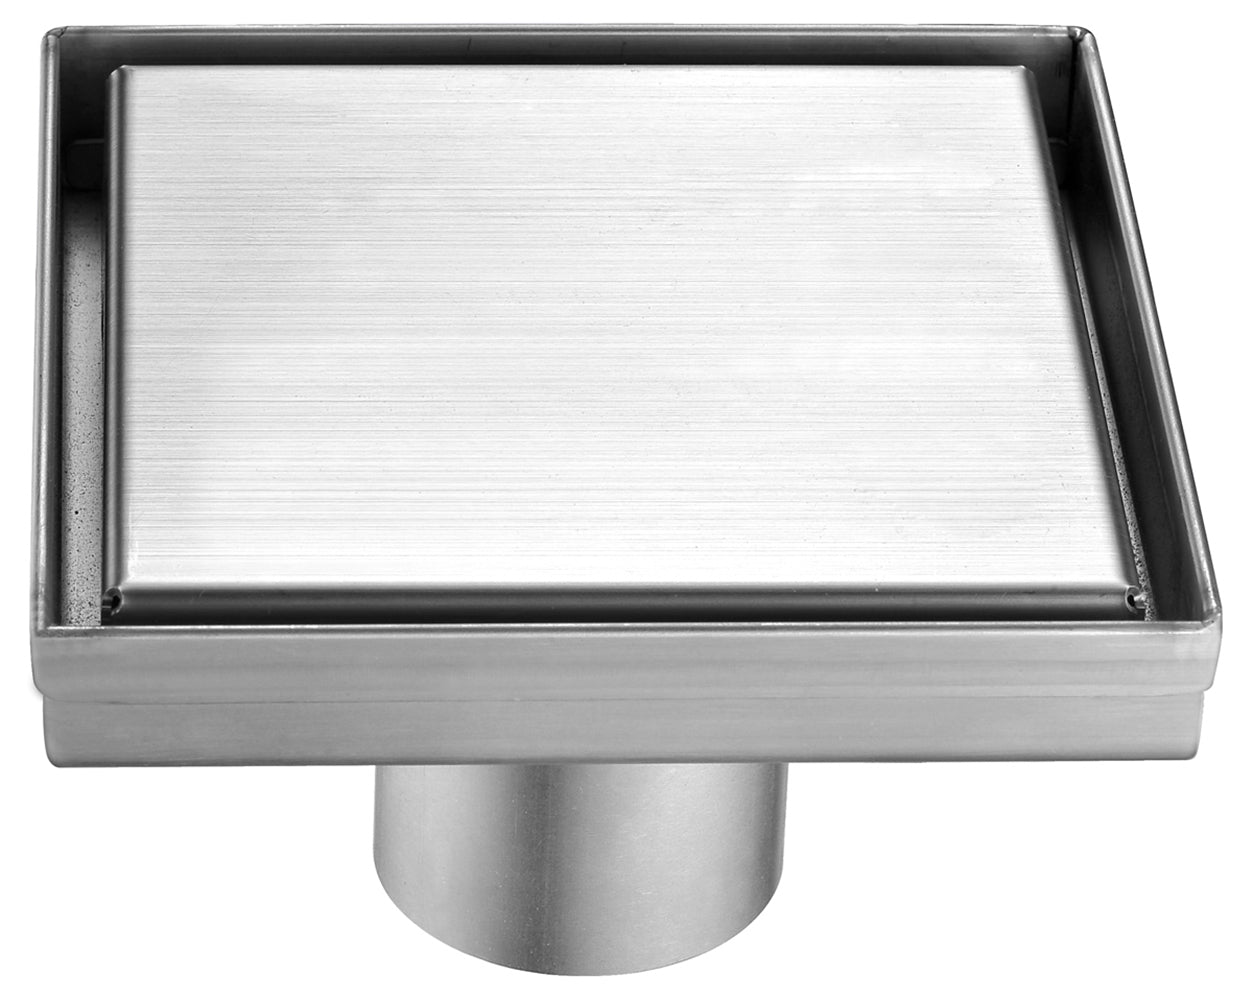 ALFI Brand - 5" x 5" Modern Square Brushed Stainless Steel Shower Drain with Solid Cover | ABSD55B-BSS